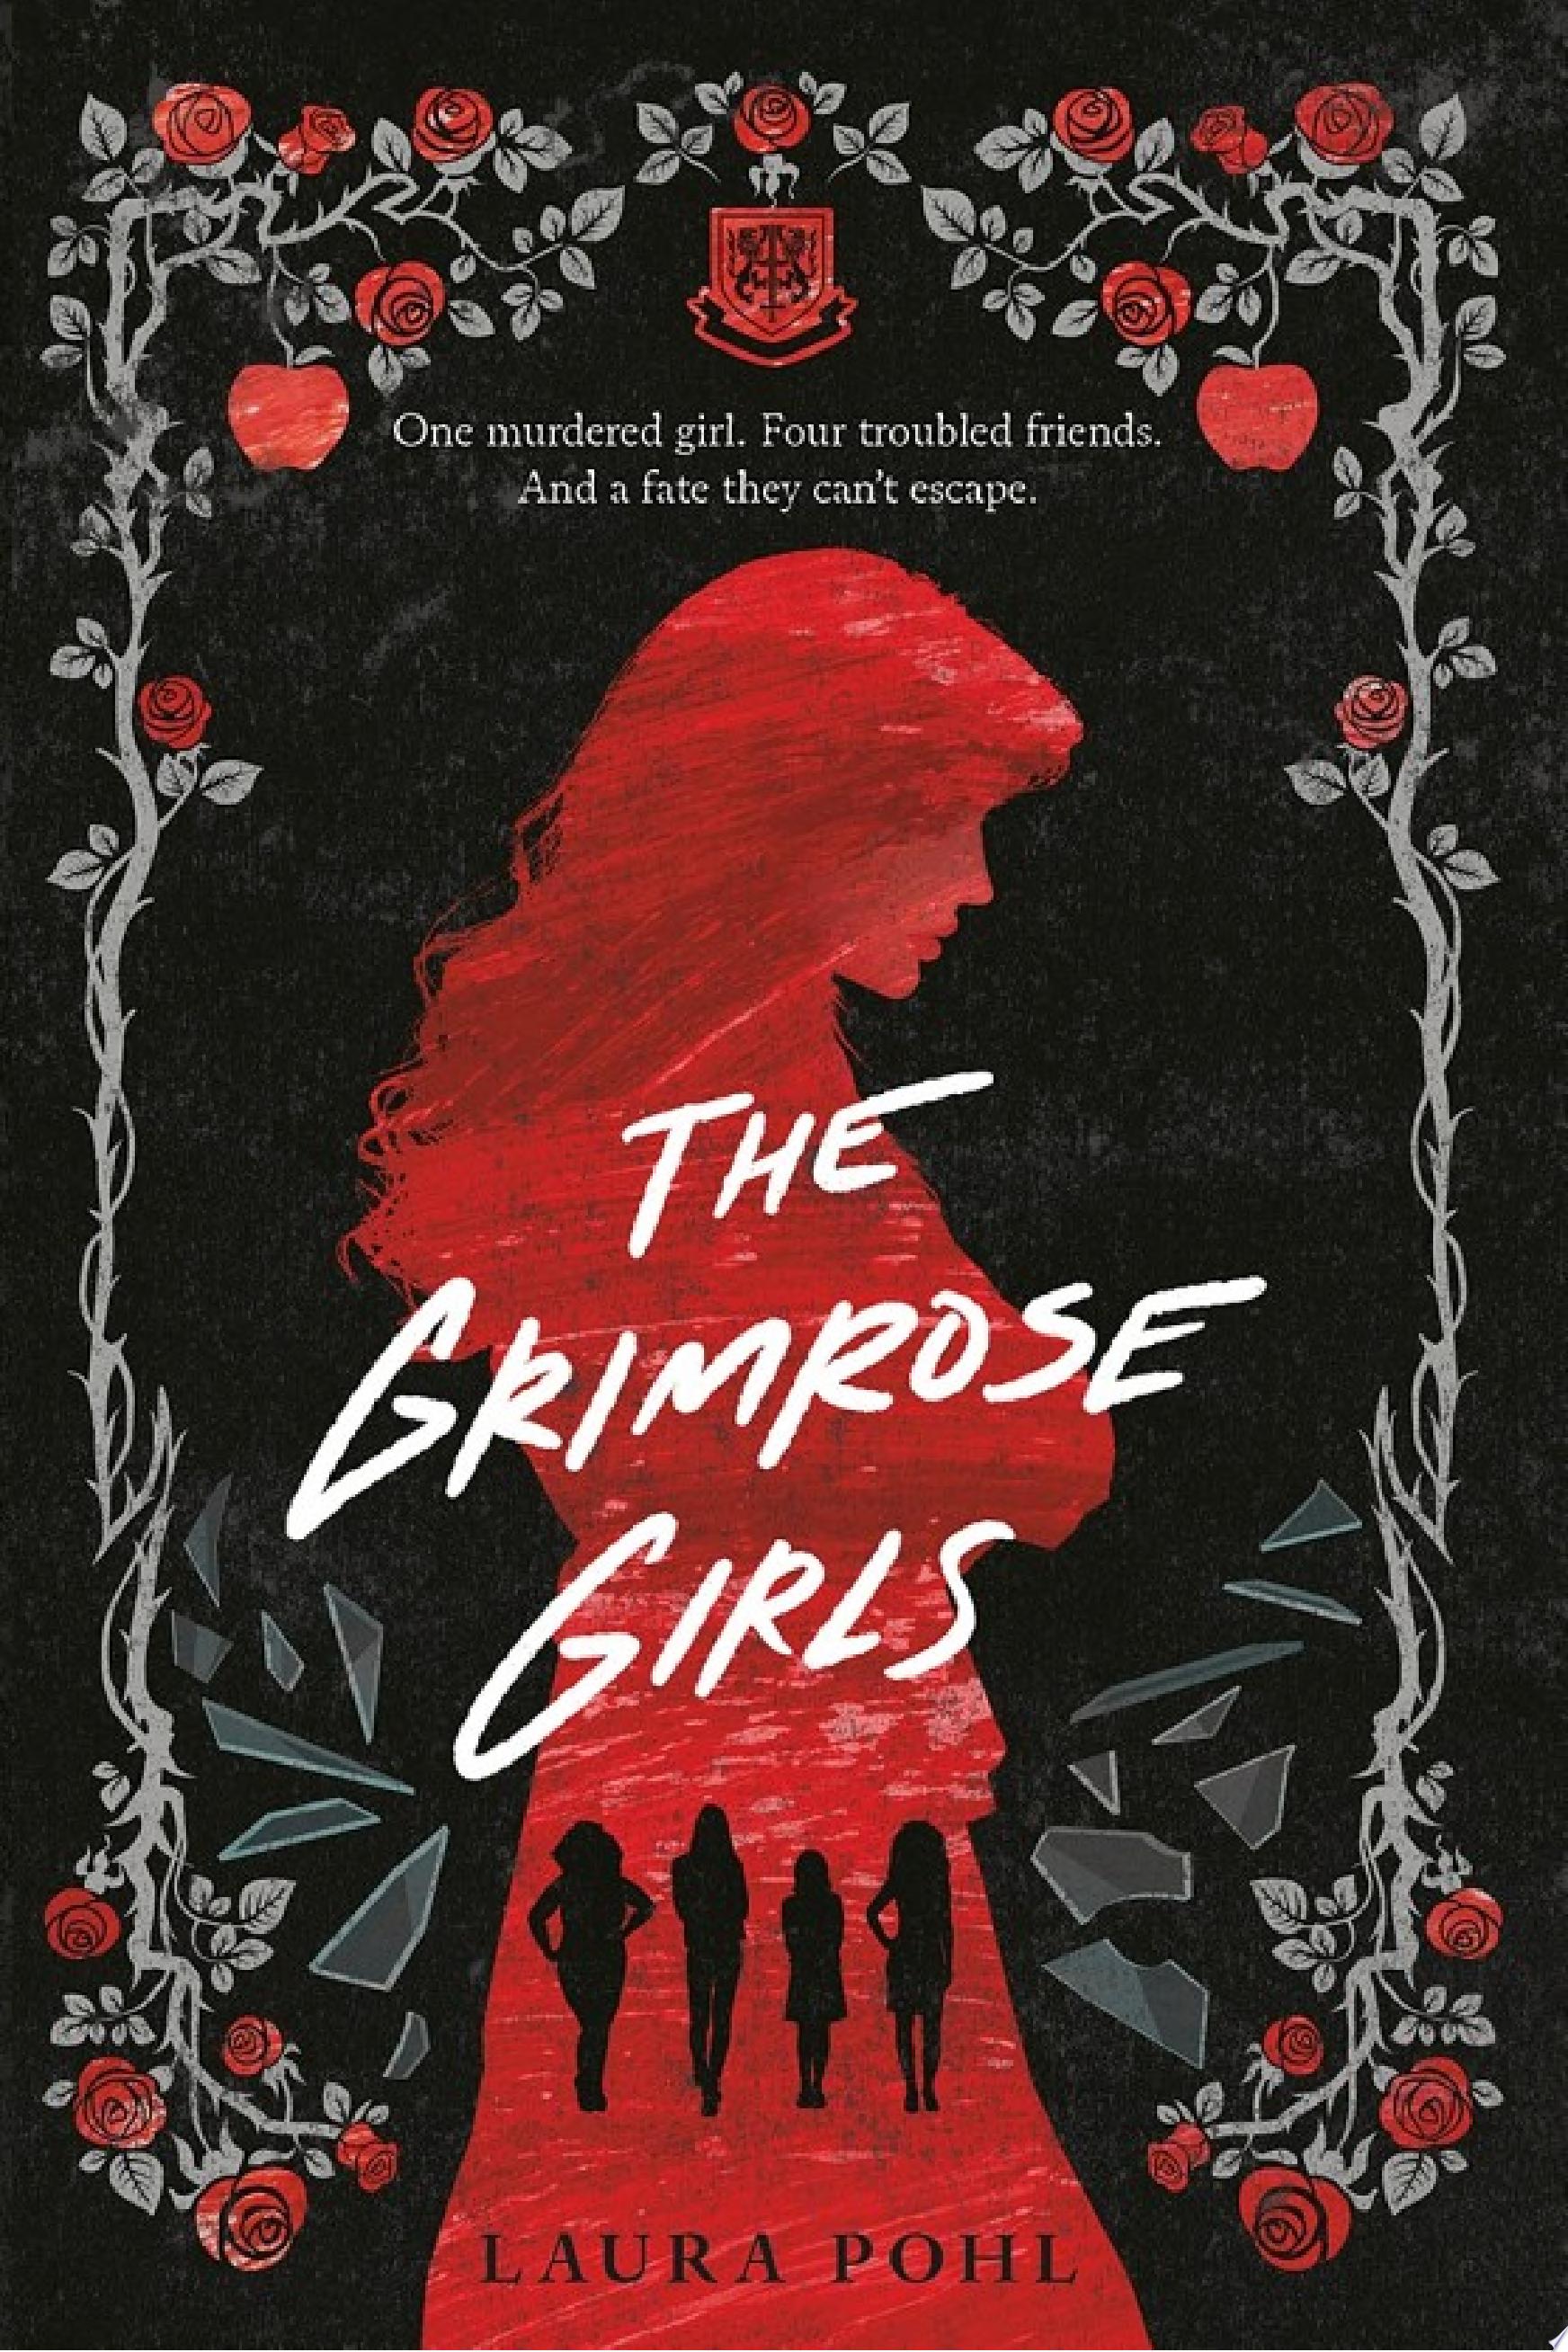 Image for "The Grimrose Girls"